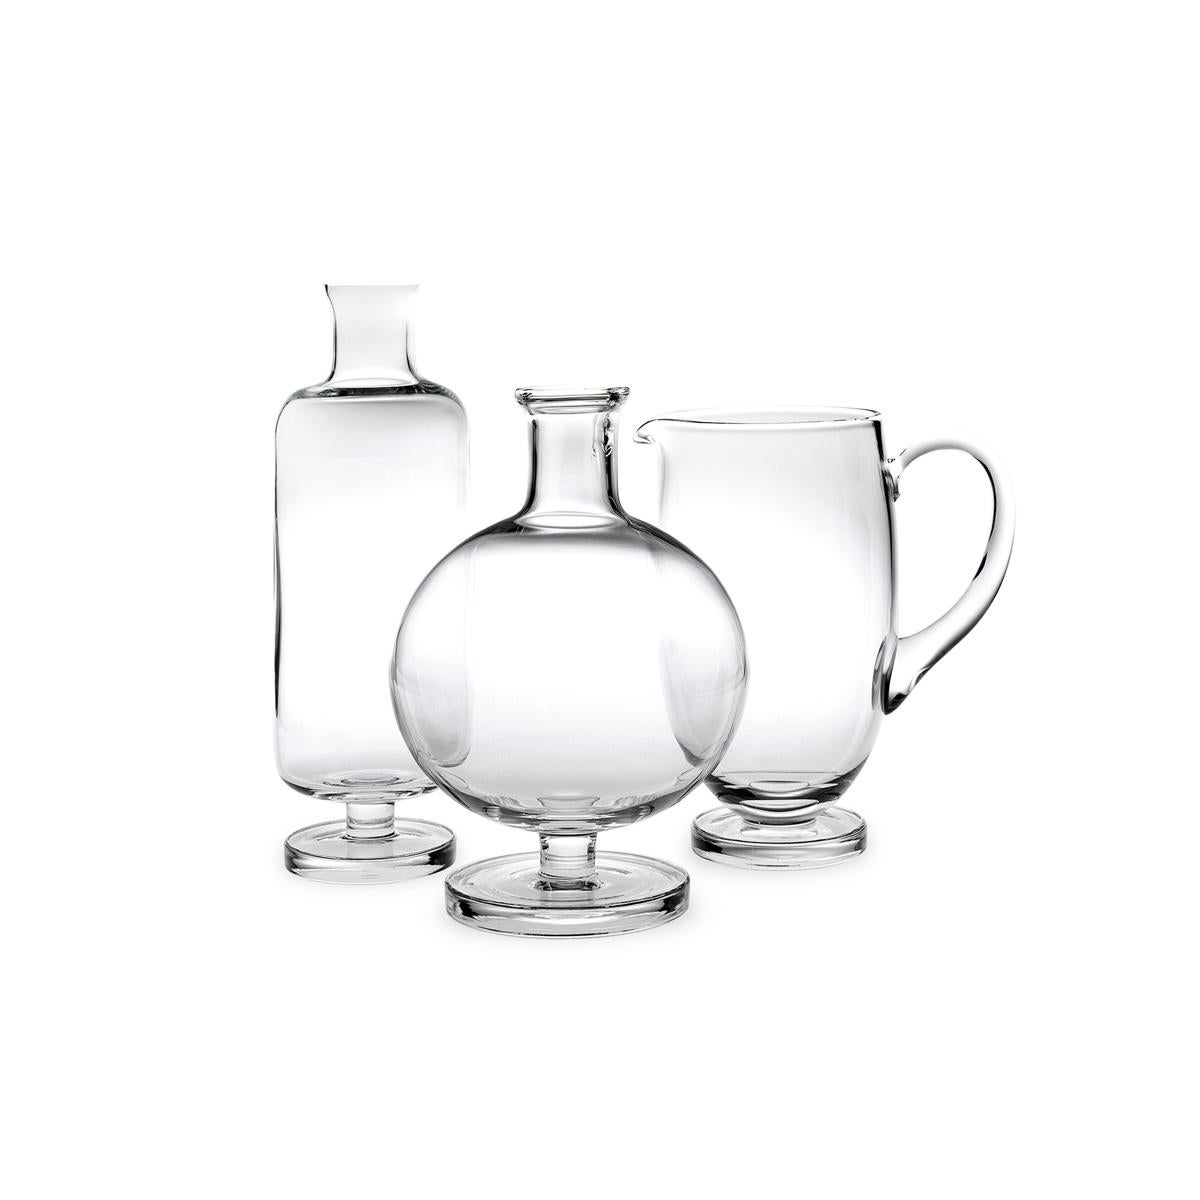 Bottle made in blown in a mold glass. The Tulip collection is a glassware family by Aldo Cibic, who designed these pieces walking the line between classical and postmodern design. The boldly simple geometric forms are at once contemporary and